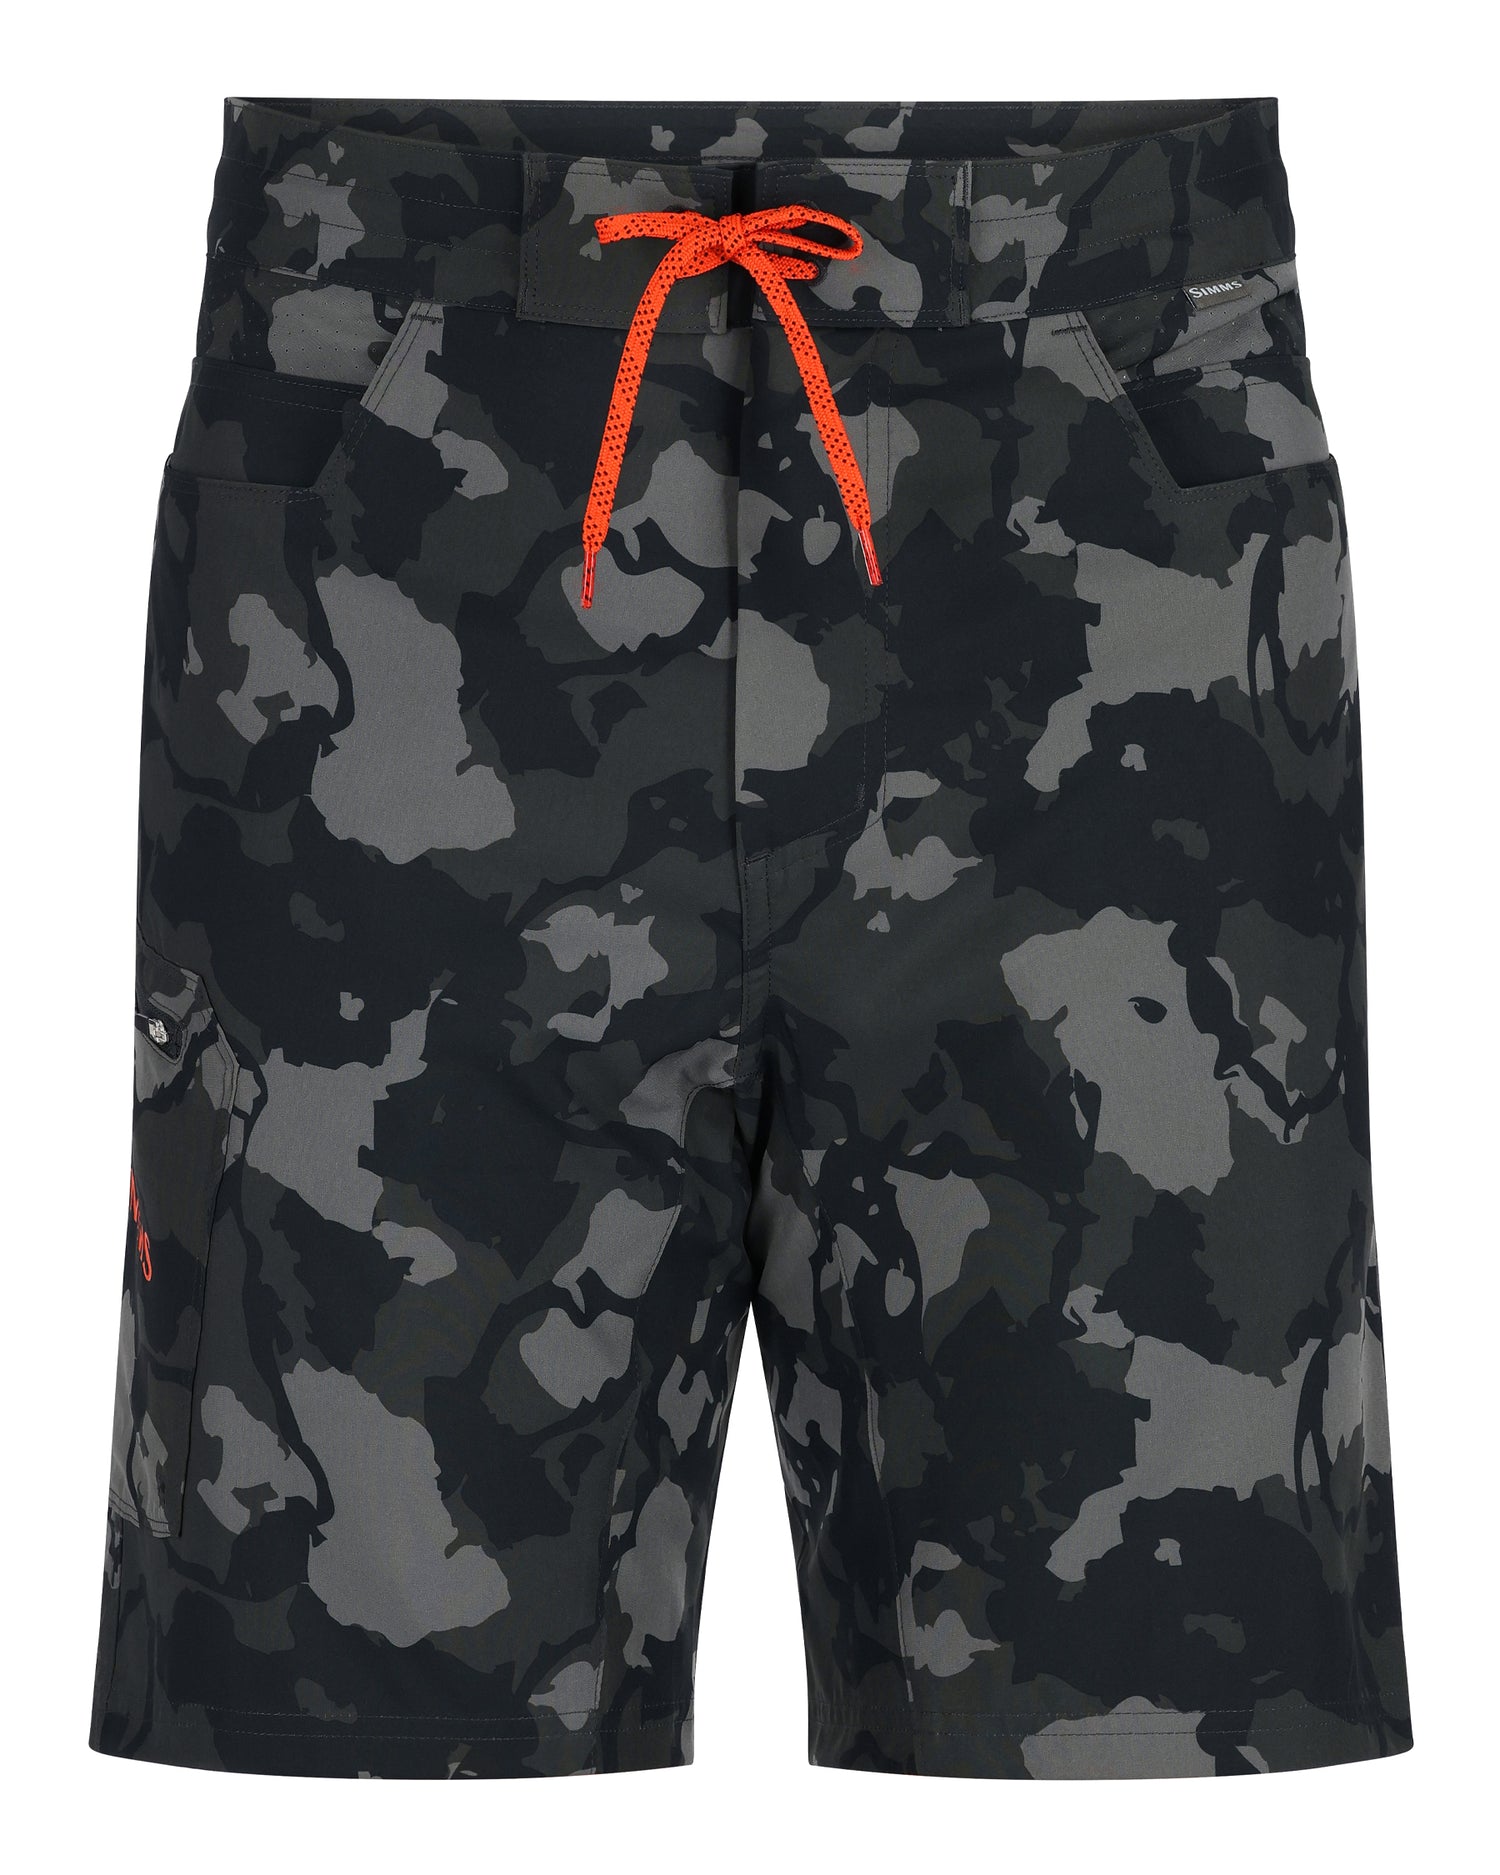 13495-1033-seamount-board-shorts-Mannequin-s23-front